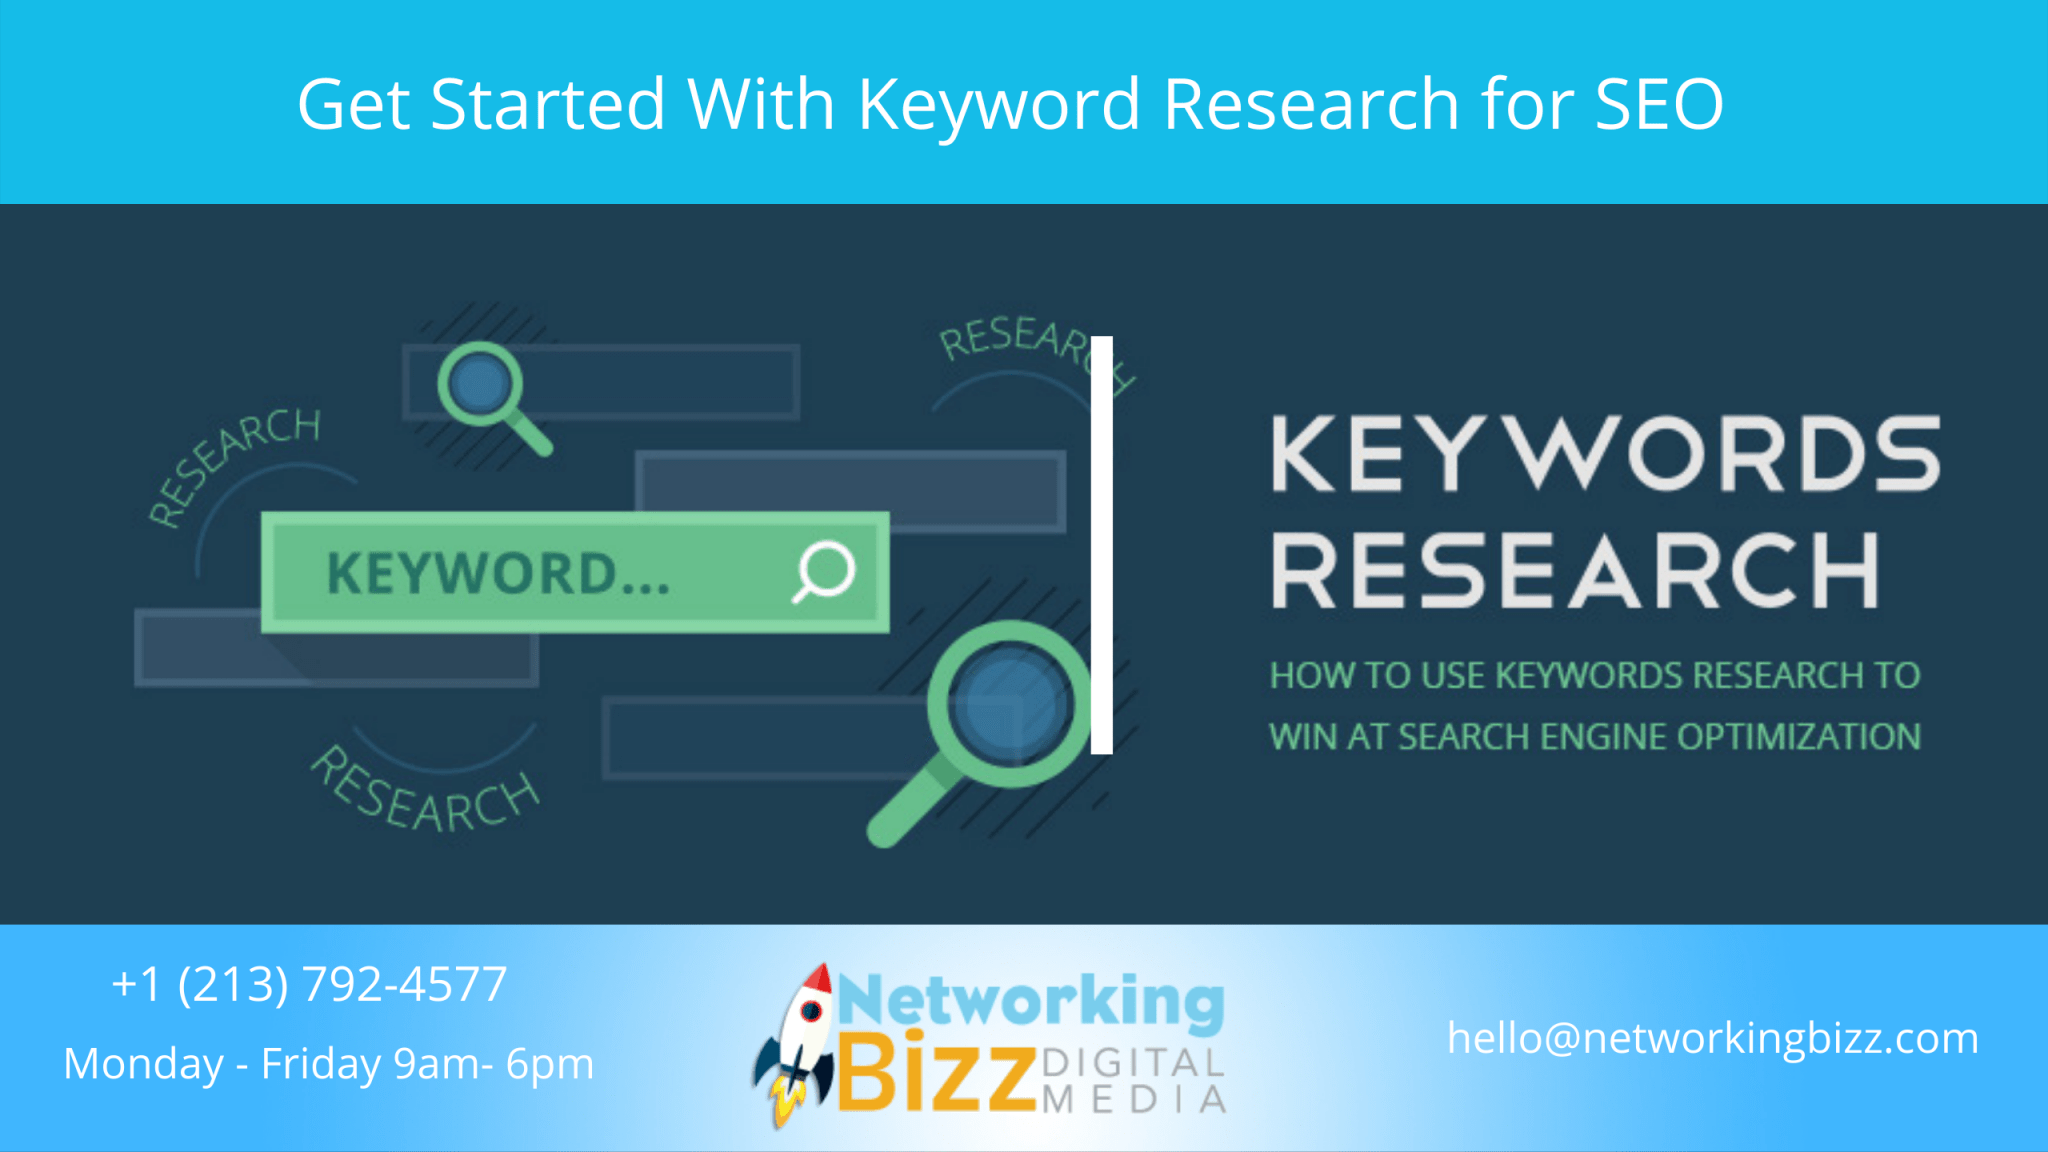 Get Started With Keyword Research for SEO